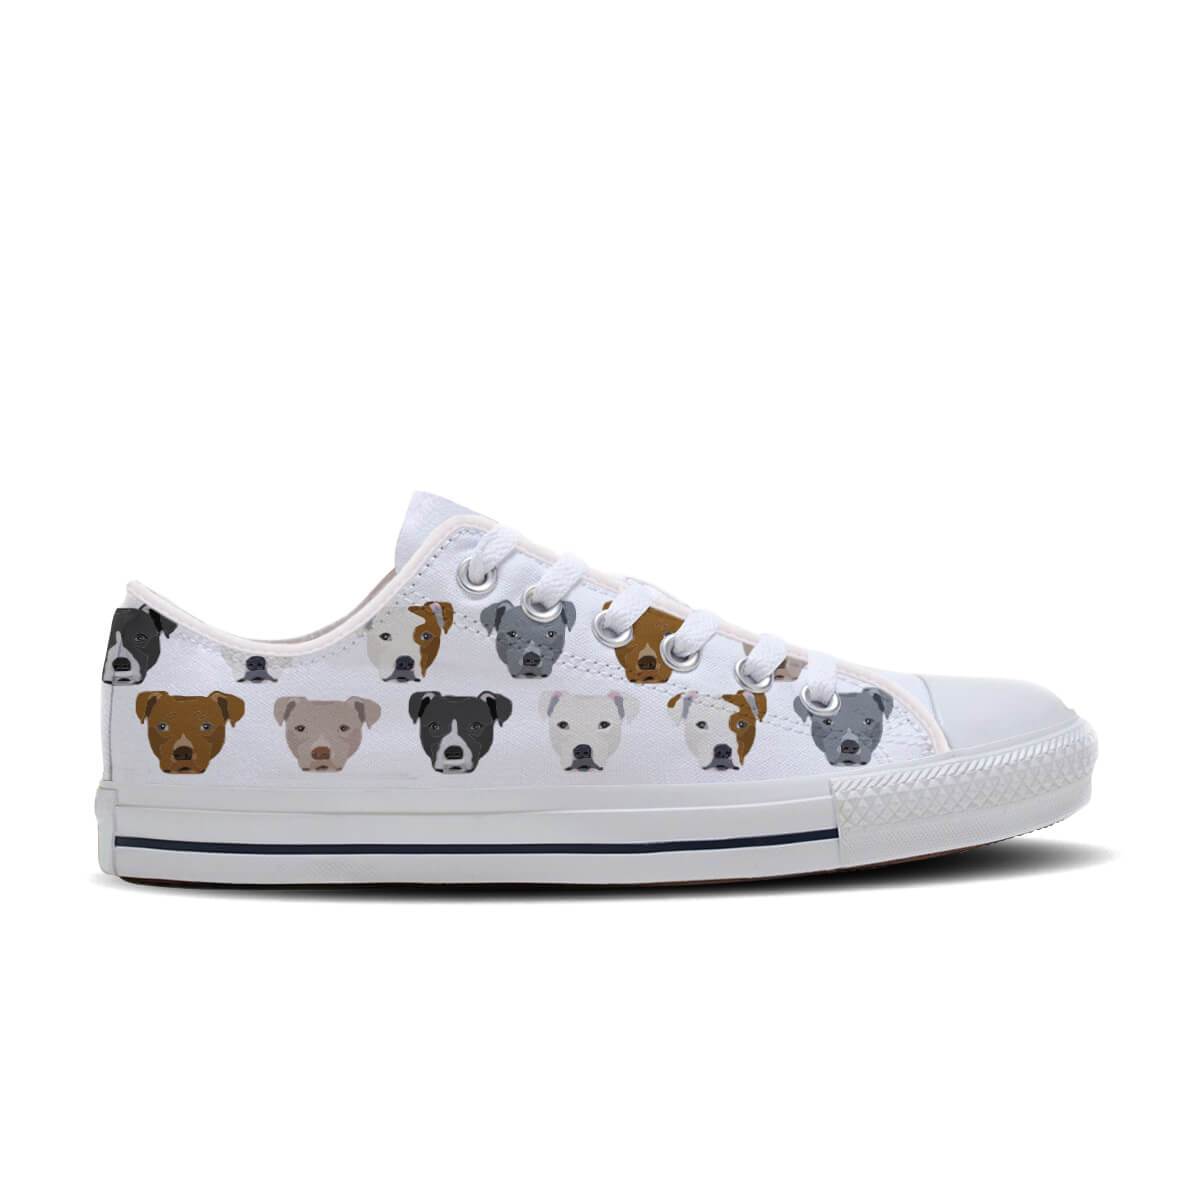 Pit Bull Shoes